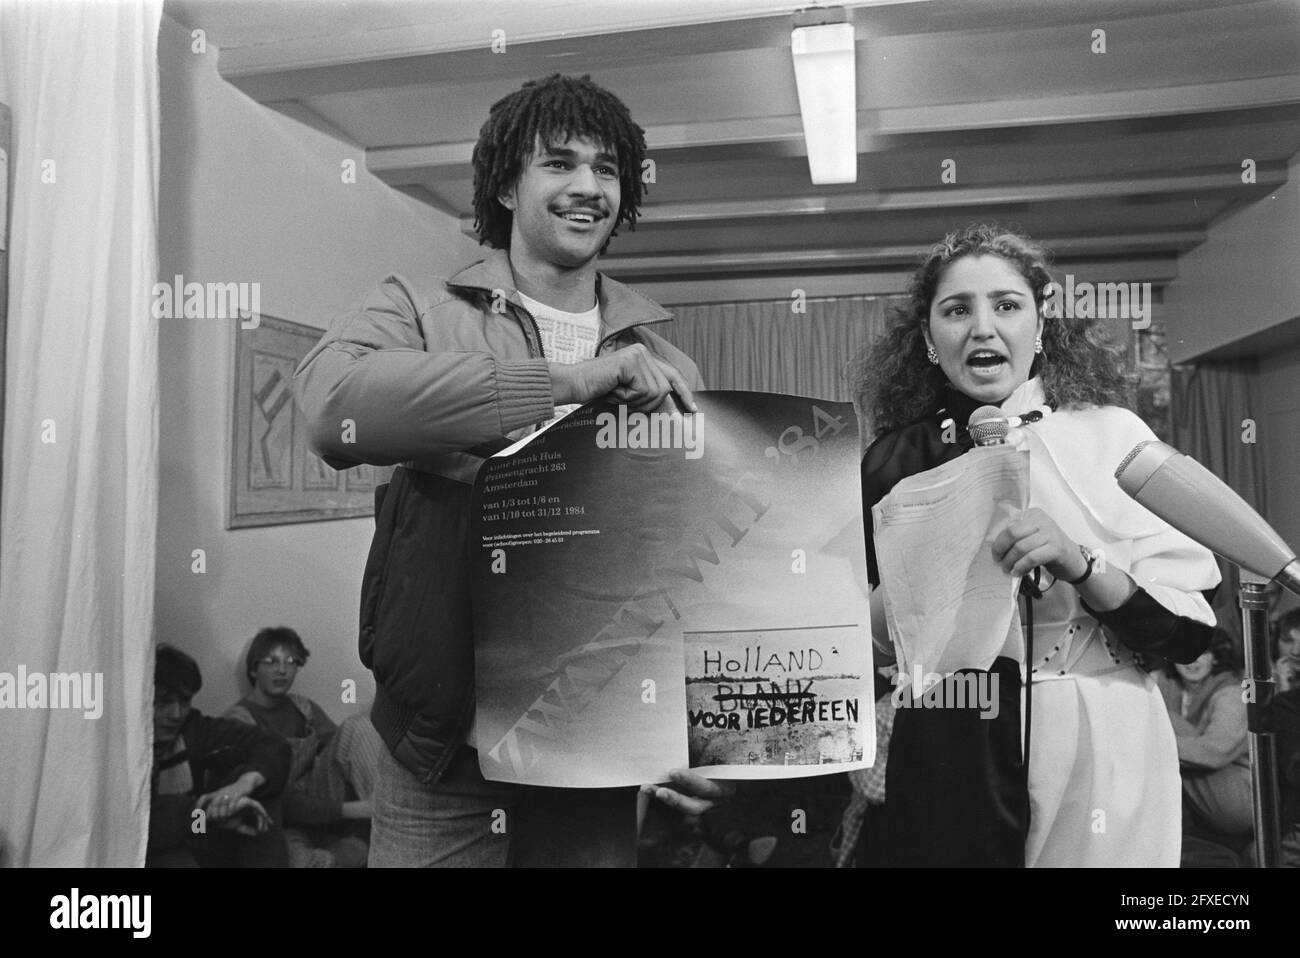 Tent. Zwart Wit on racism opened byRuud Gullit (Ajax) (Amsterdam); with  poster and Gulnaz Aslan (presenter Radio Thuisland), 29 February 1984,  RACISM, posters, exhibitions, The Netherlands, 20th century press agency  photo, news